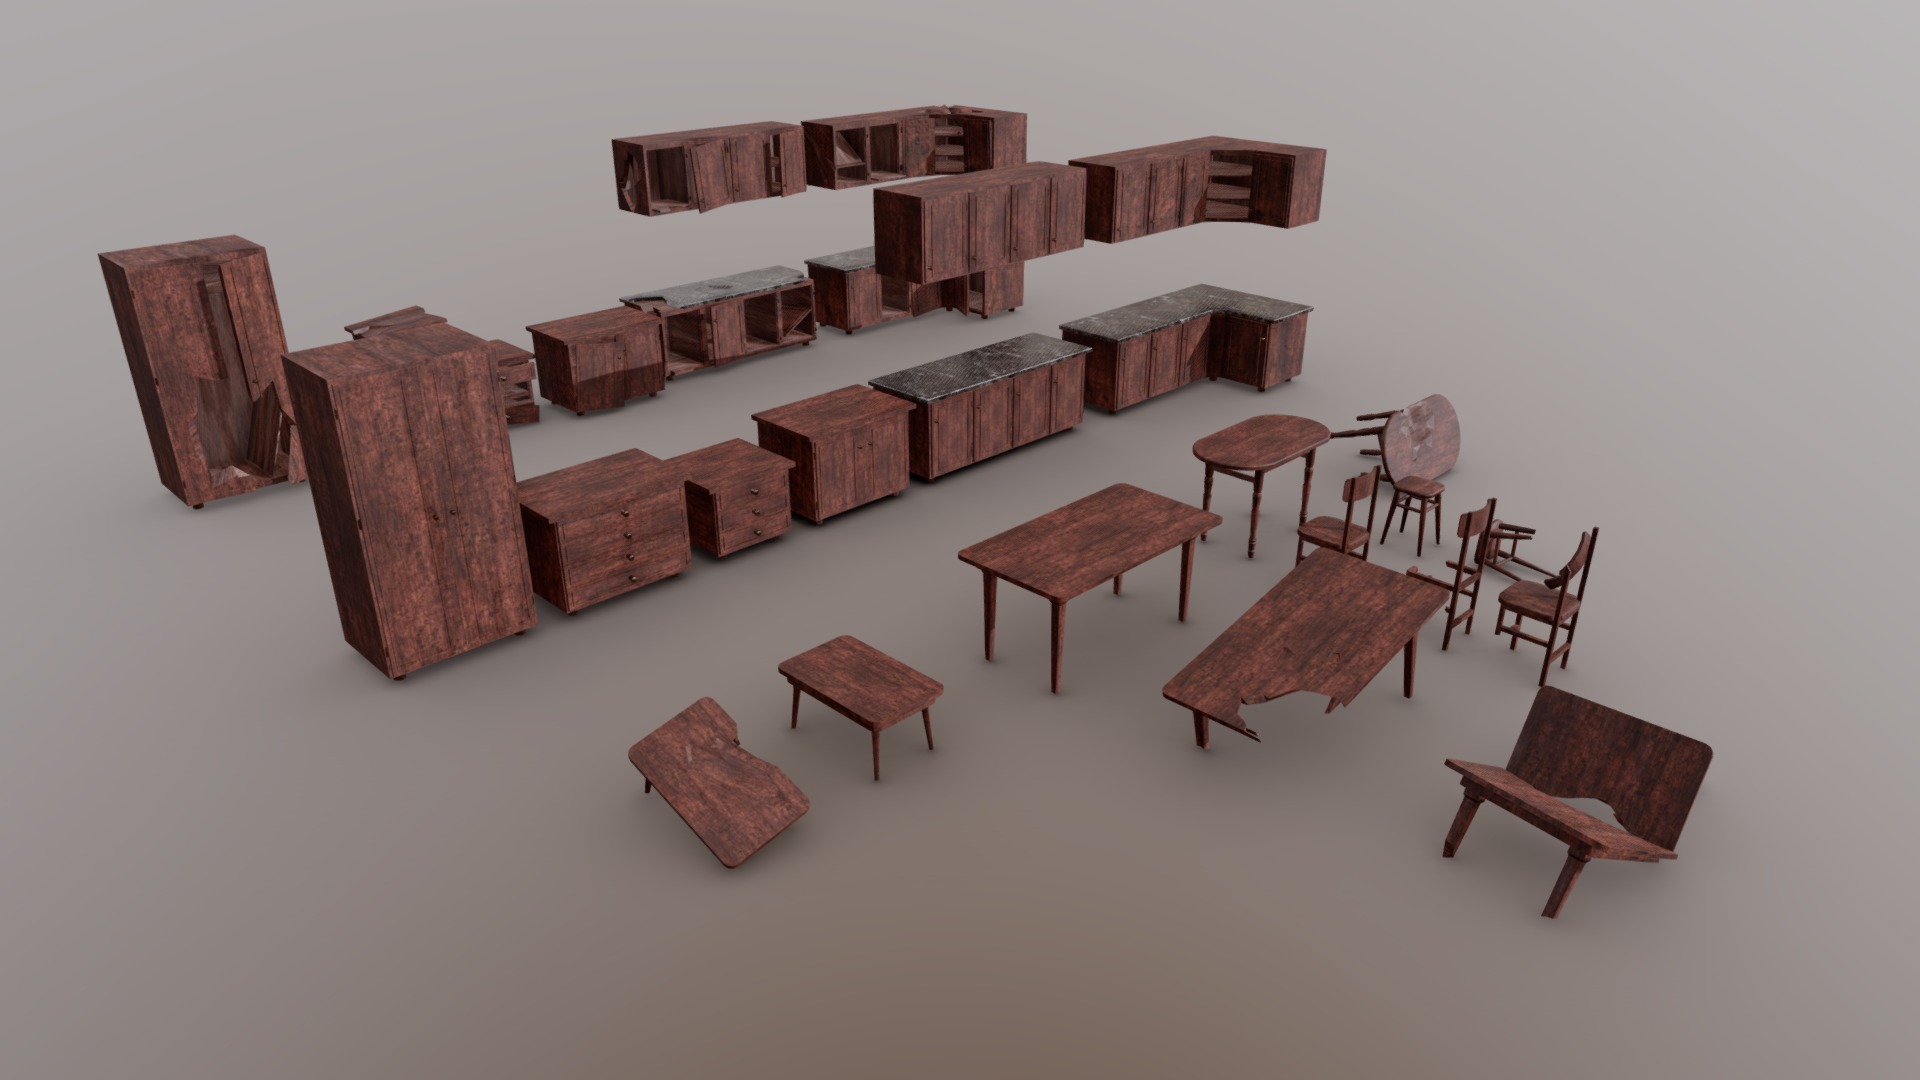 3D model Low-Poly Furniture pack - This is a 3D model of the Low-Poly Furniture pack. The 3D model is about a group of wooden chairs.